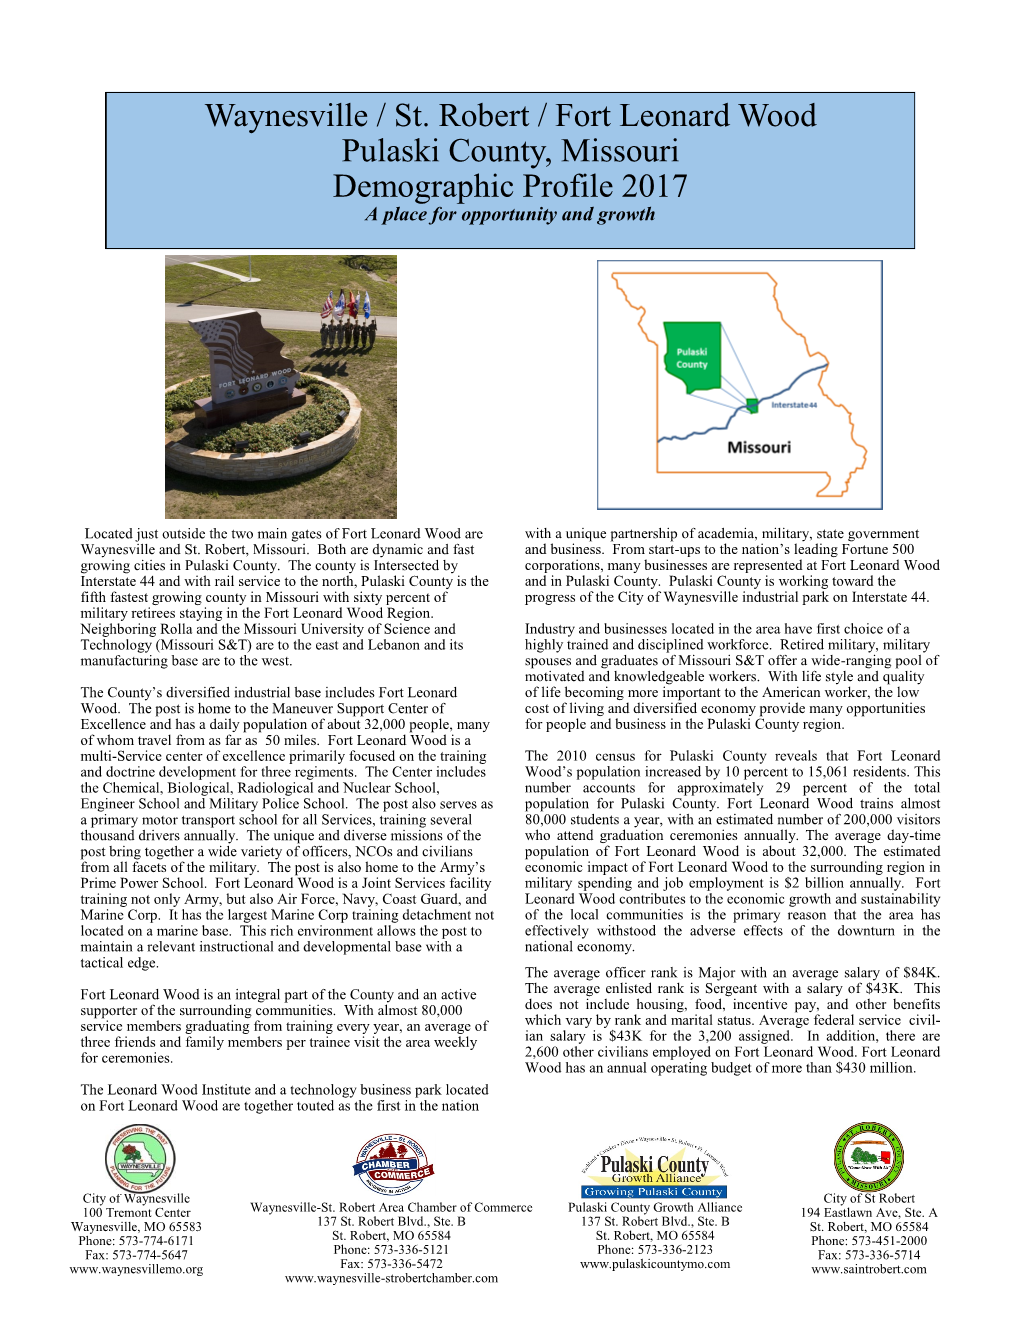 Waynesville / St. Robert / Fort Leonard Wood Pulaski County, Missouri Demographic Profile 2017 a Place for Opportunity and Growth